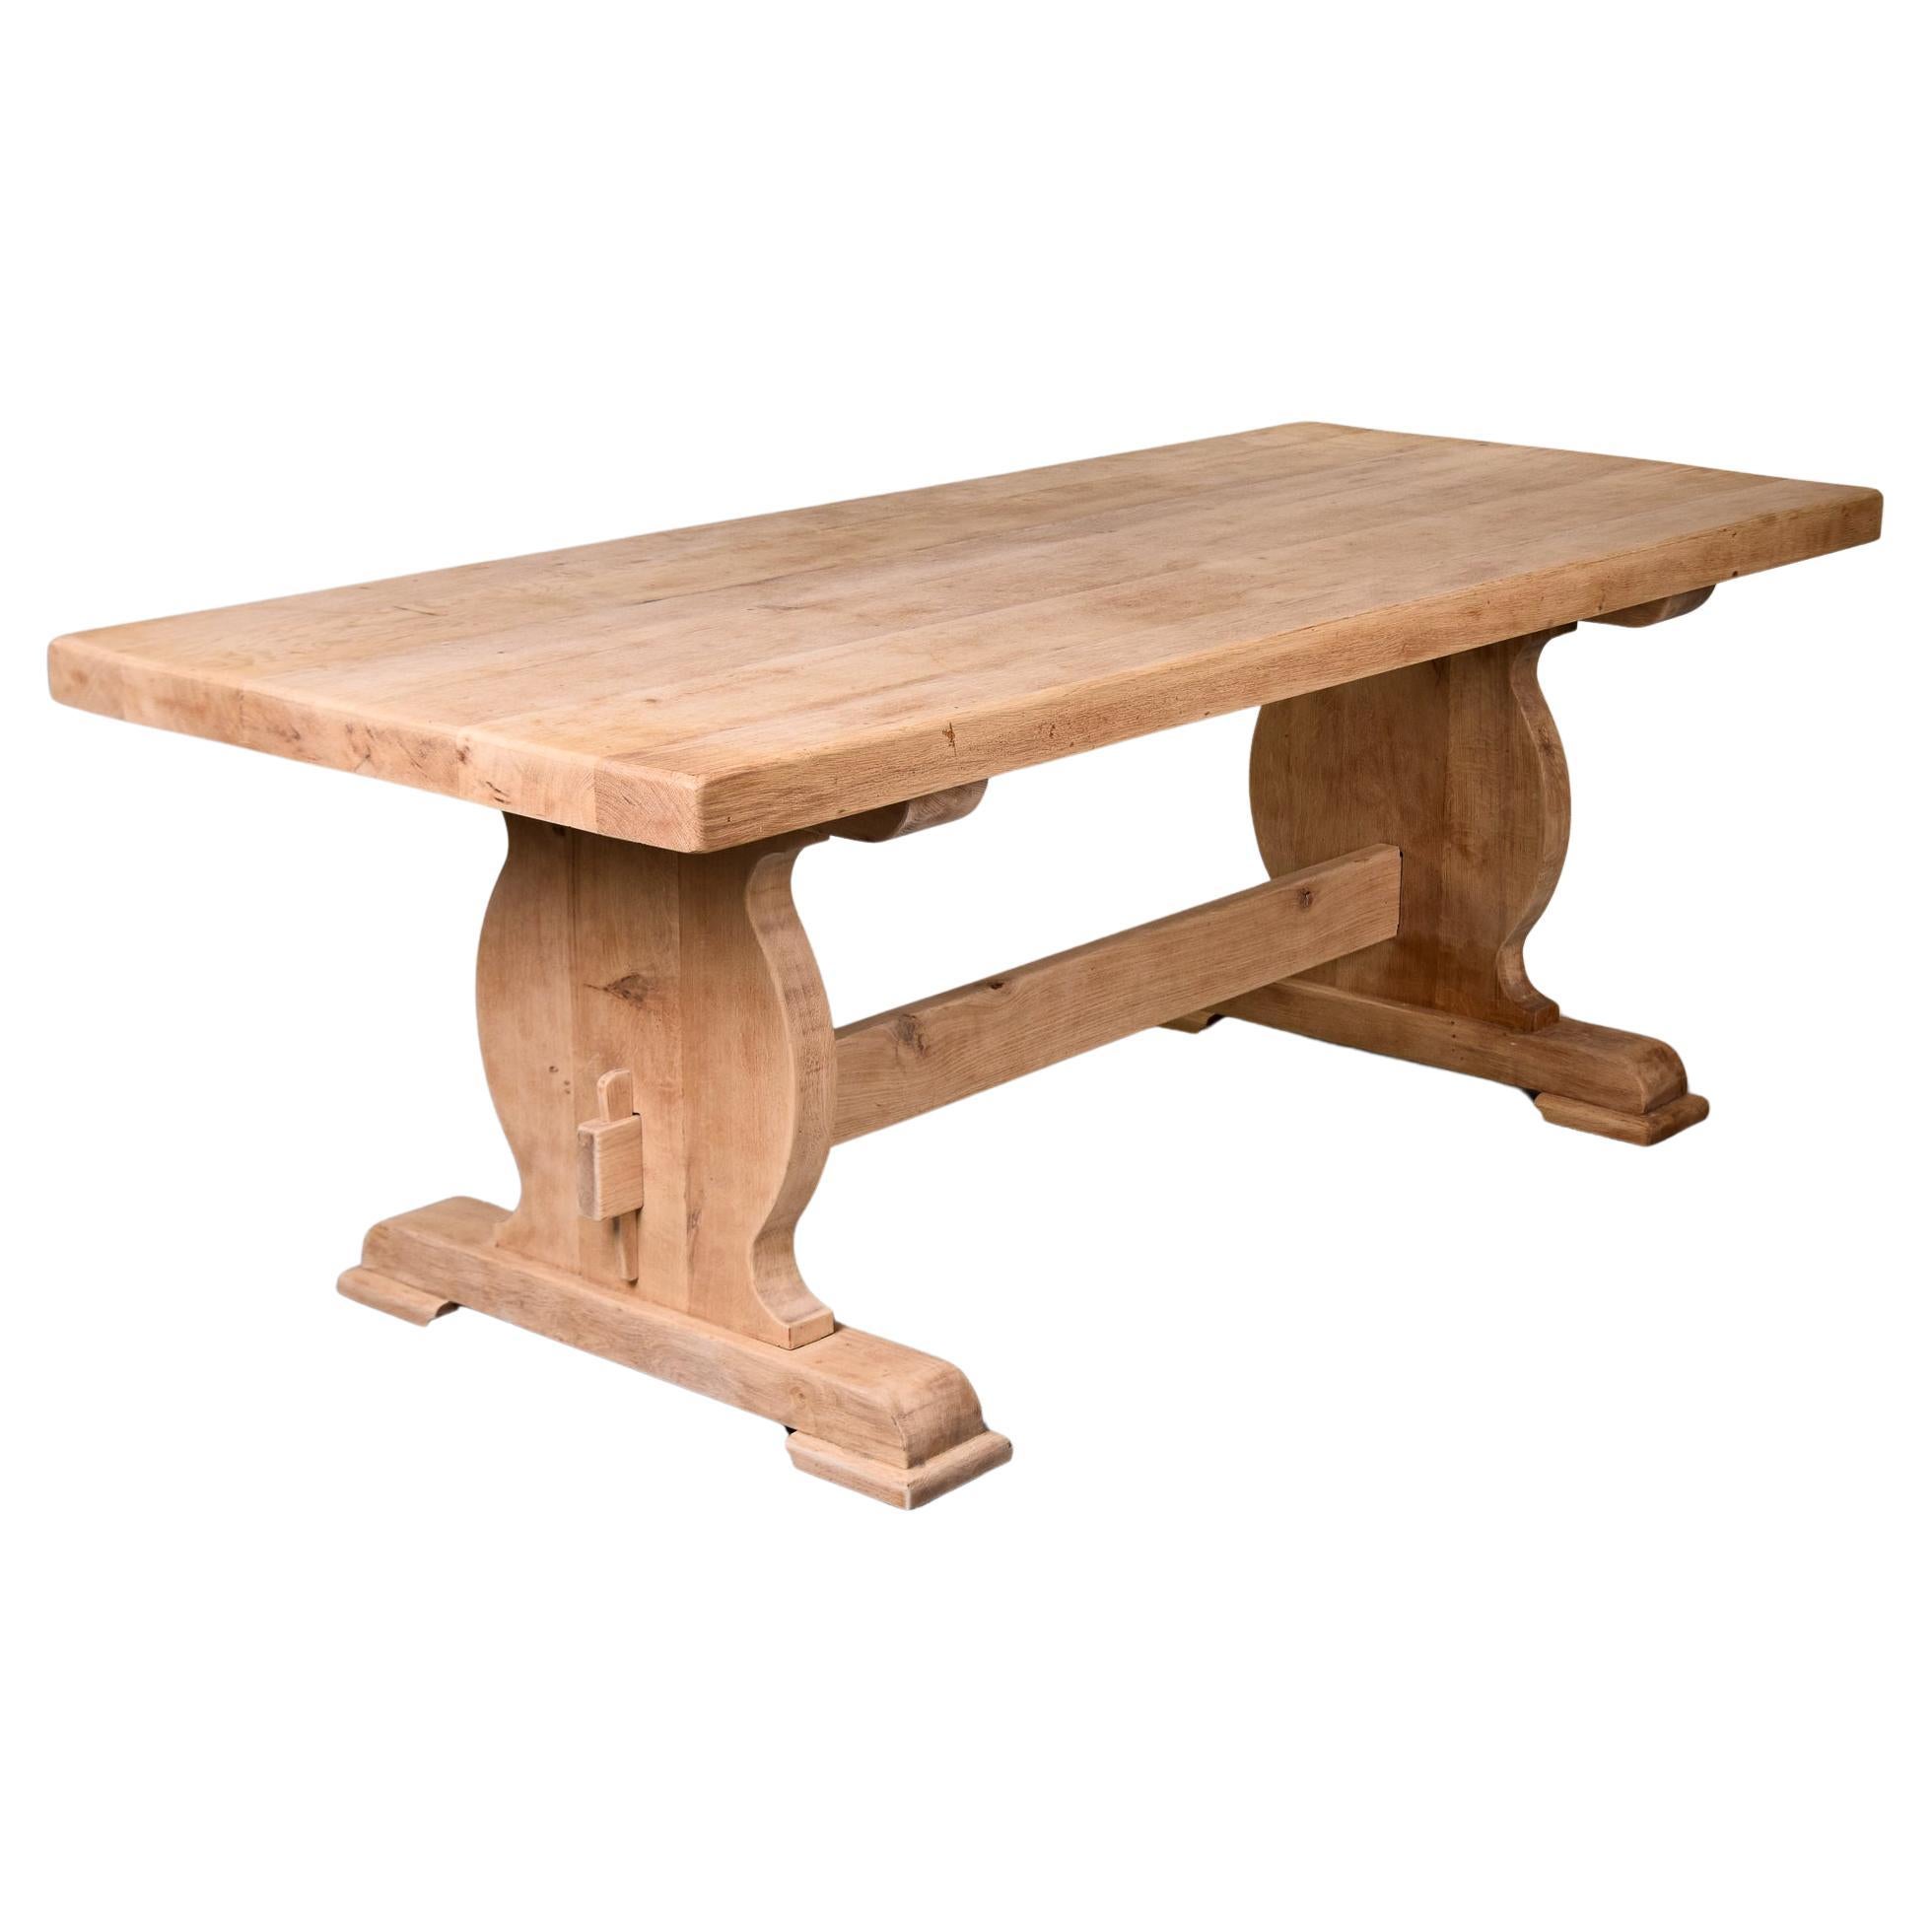 Circa 1900 Sanded Bare Oak French Country Trestle Table